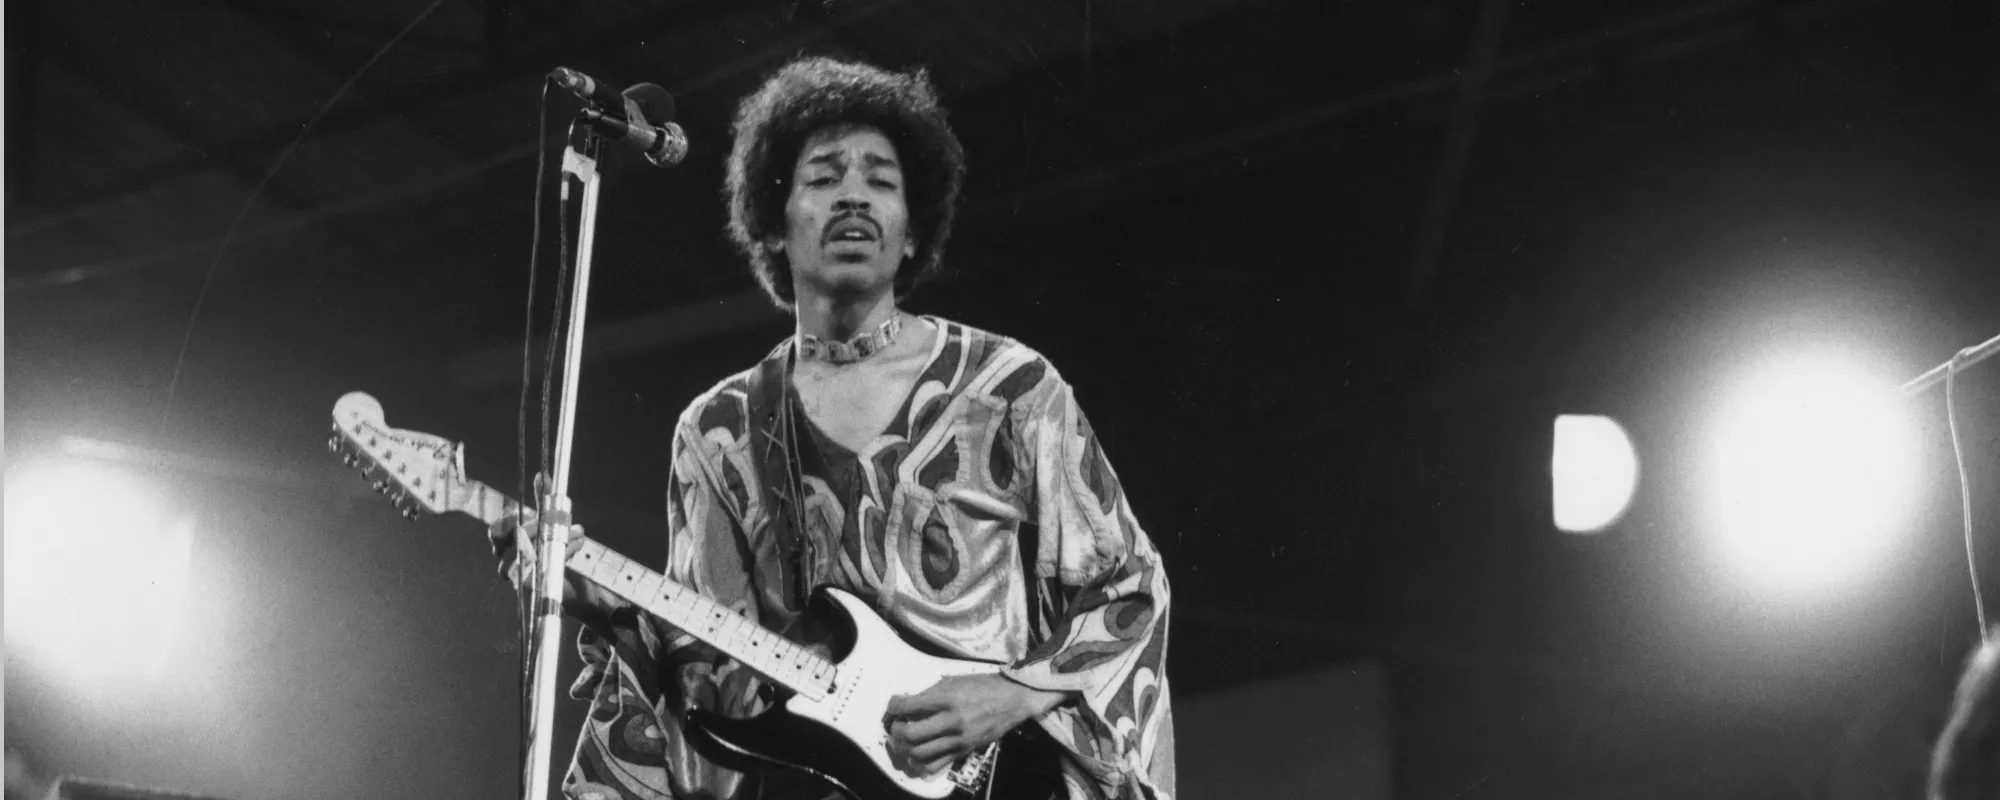 Special Screening of Jimi Hendrix Doc ‘Music, Money, Madness,’ Taking Place This Month in New York